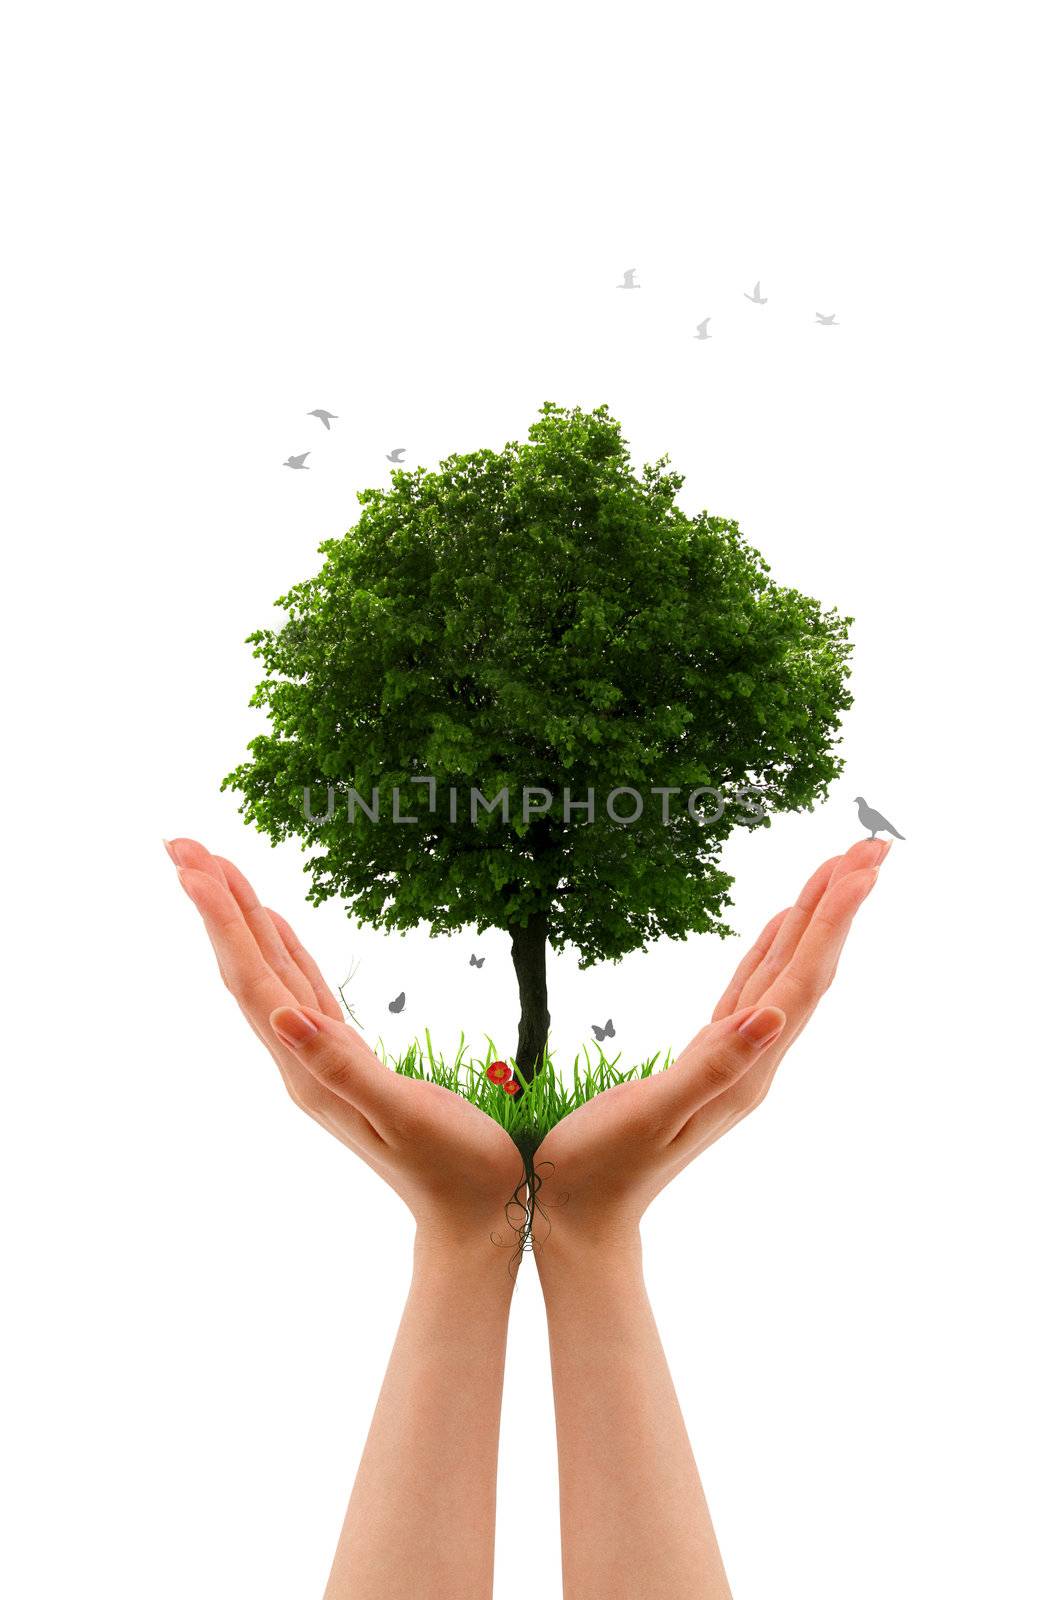 High resolution graphic of hands holding a tree. 